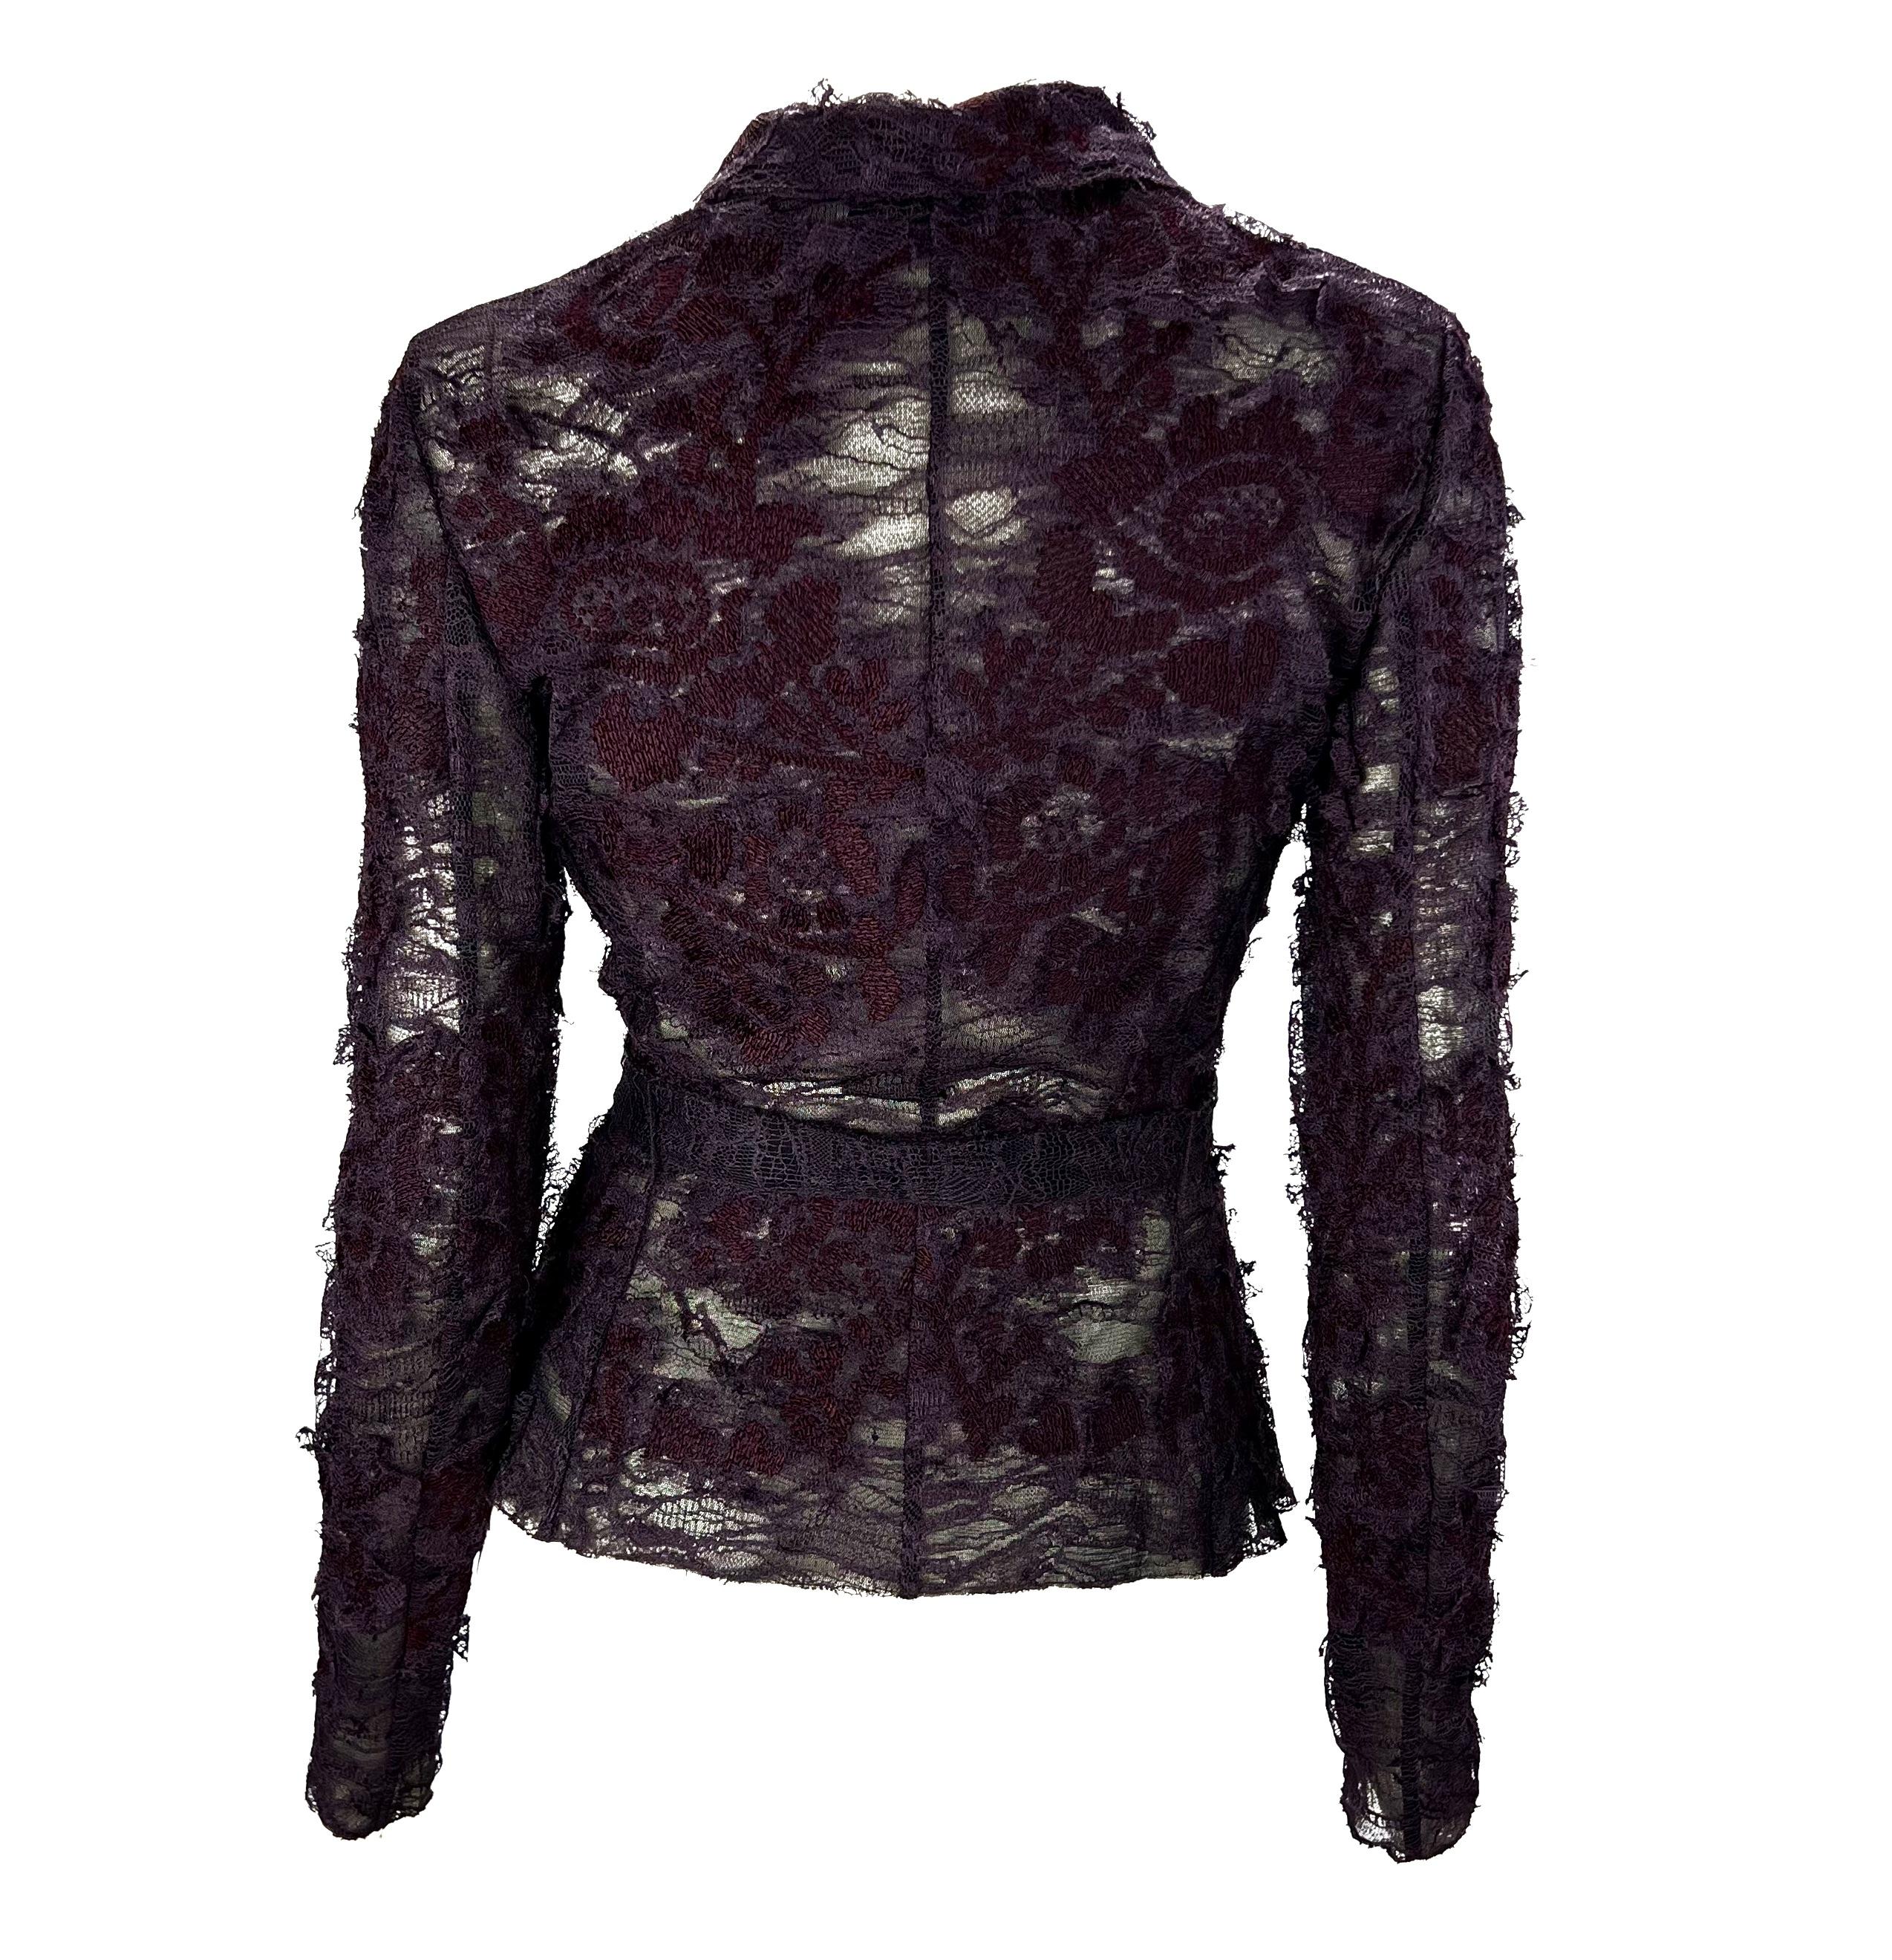 Black F/W 2001 Yves Saint Laurent by Tom Ford Runway Purple Floral Lace Tie Blouse For Sale